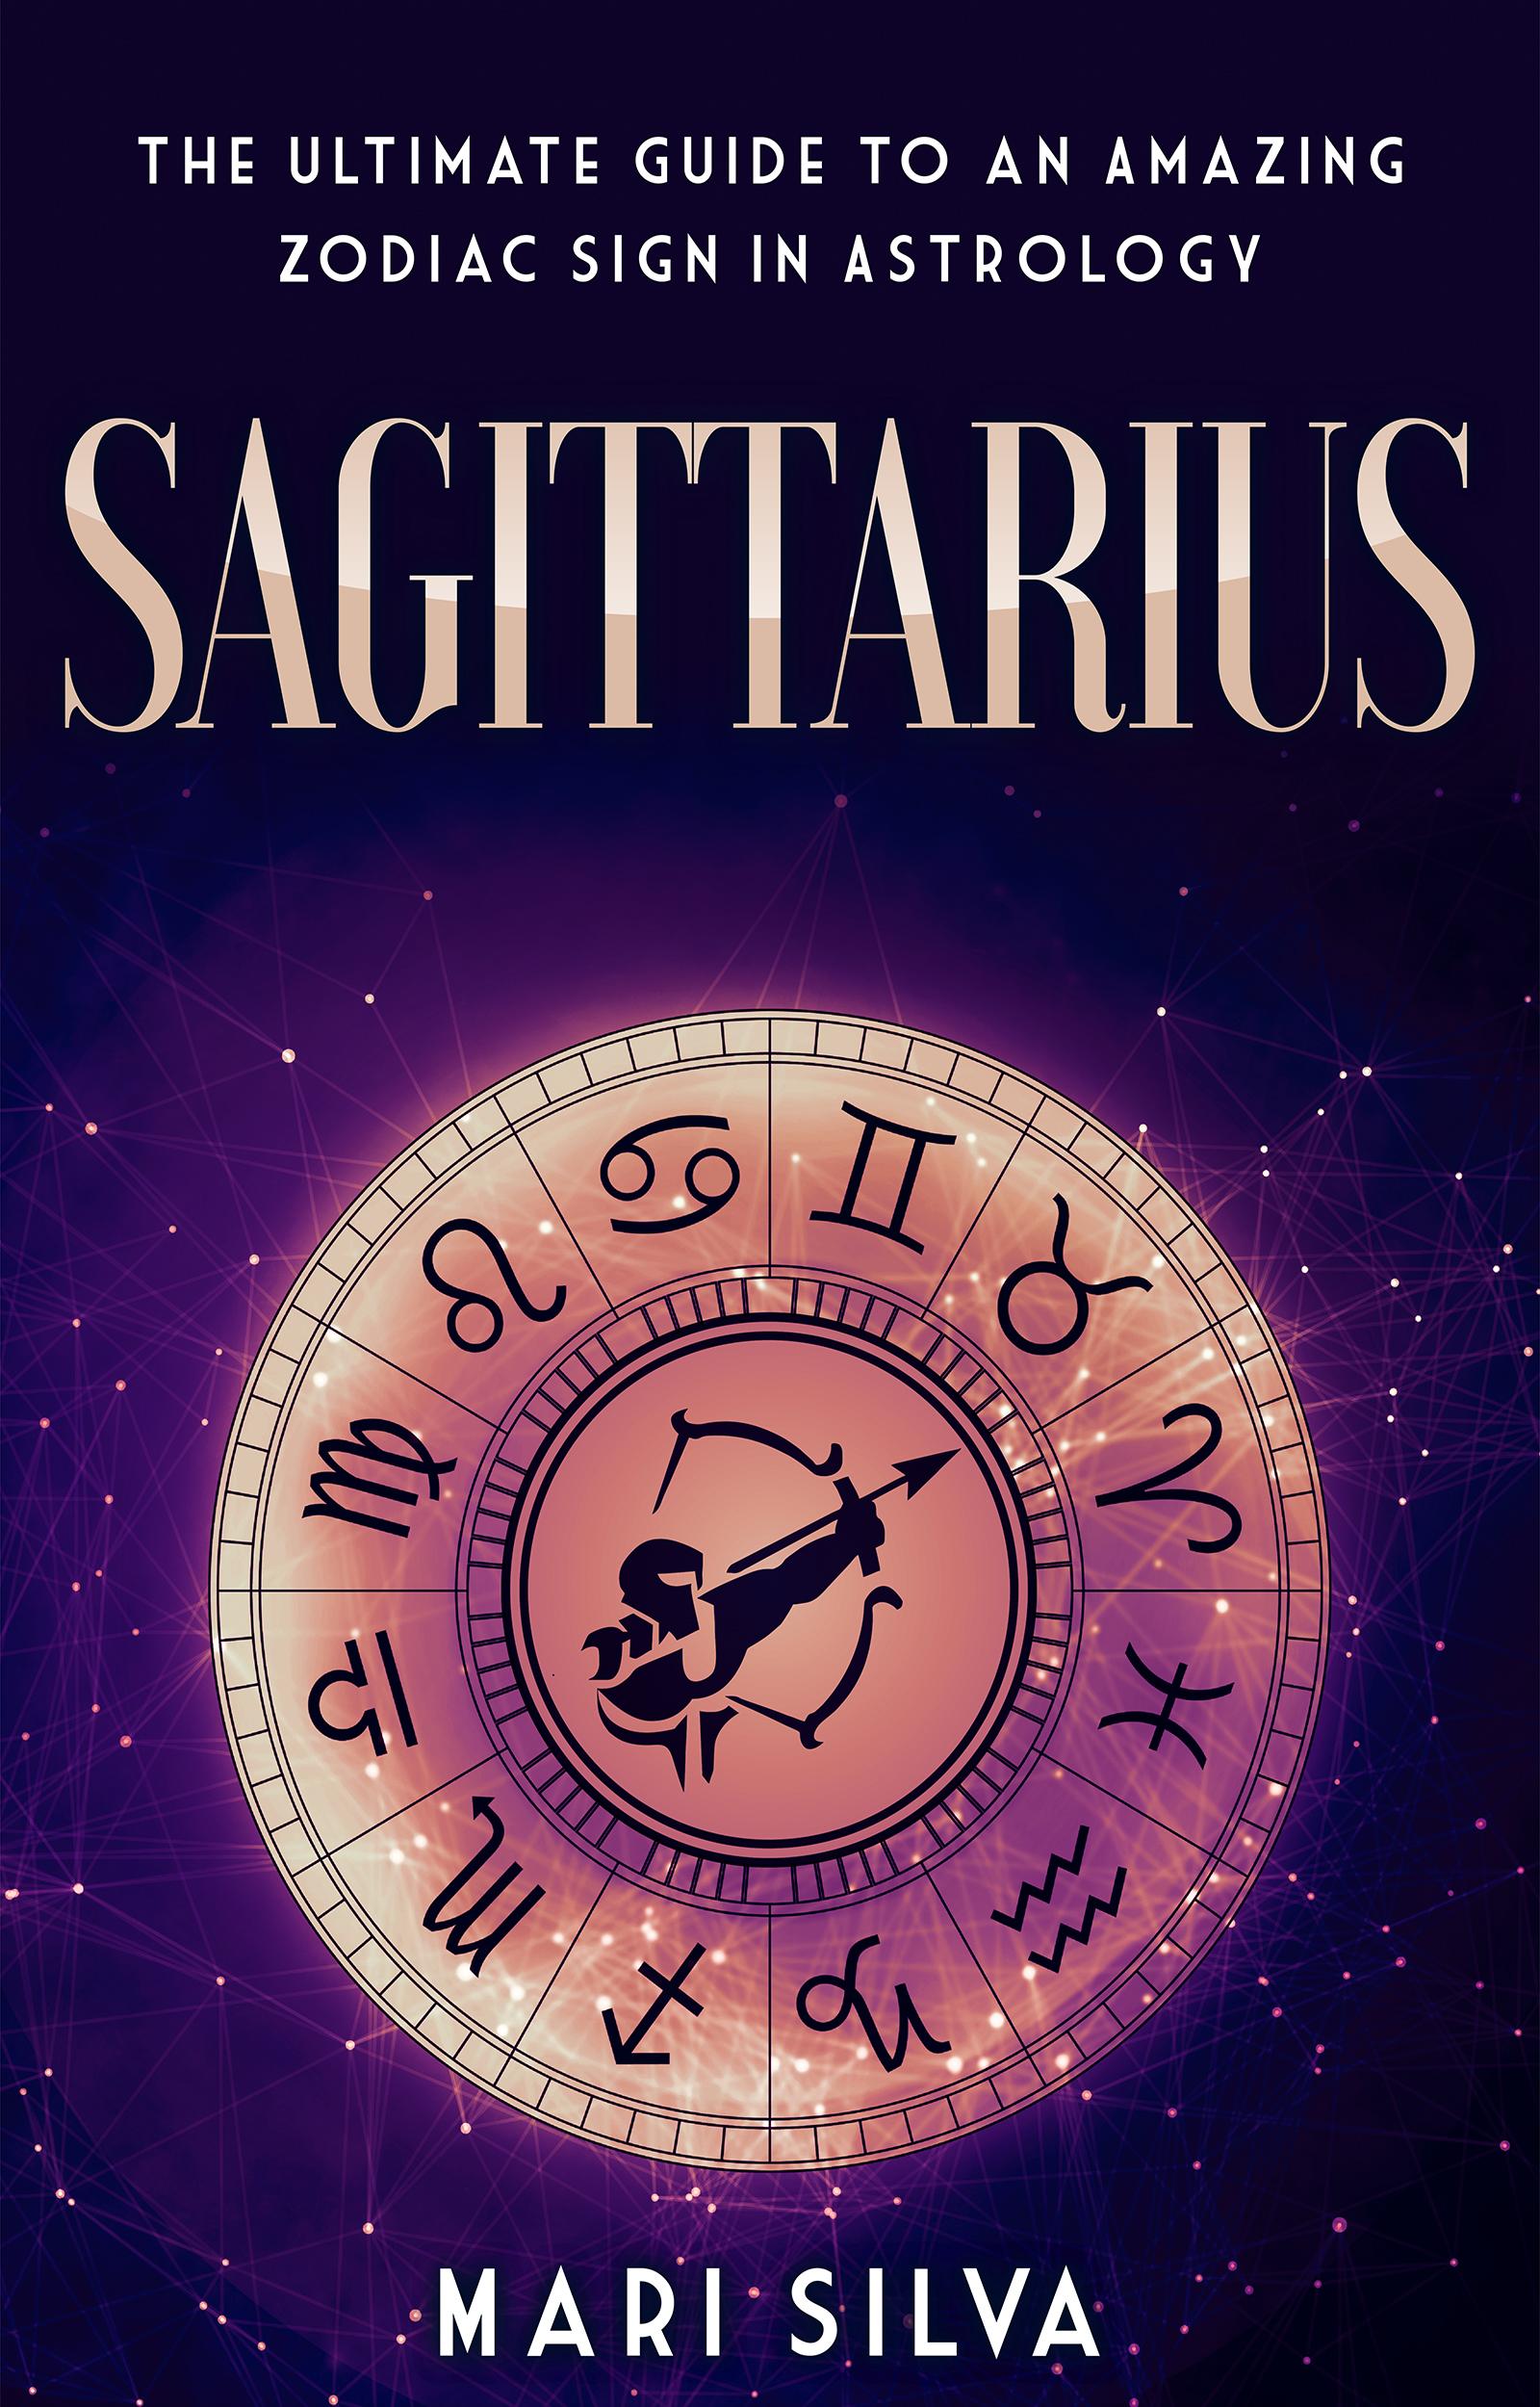 Get your free copy of Sagittarius The Ultimate Guide to an Amazing